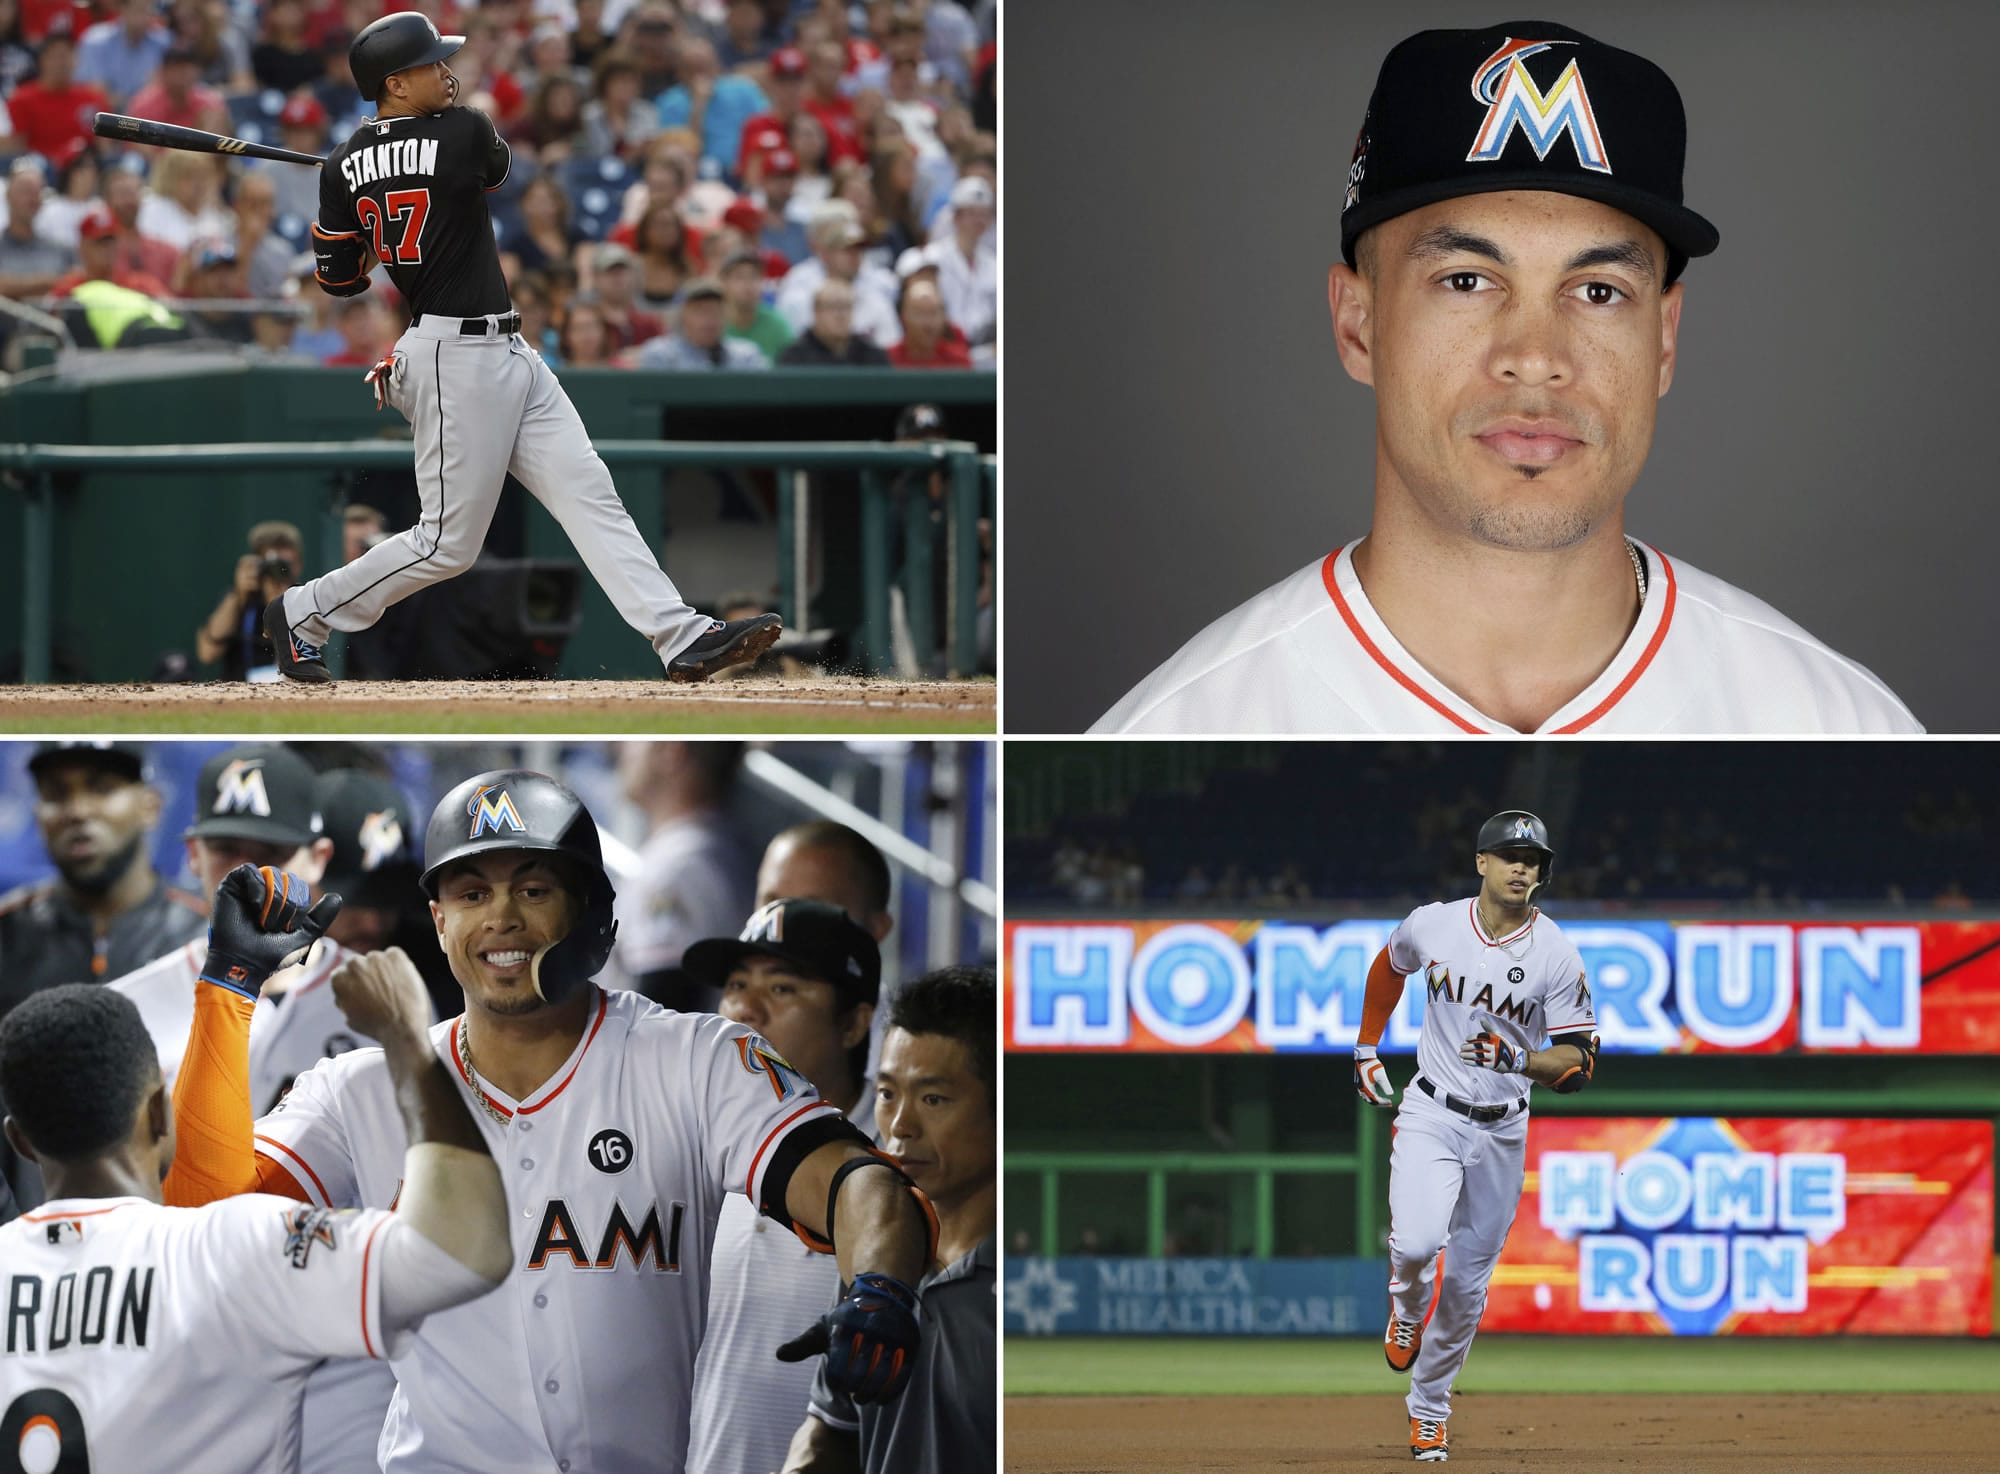 Clockwise from top left are 2017 file photos showing: Miami Marlins' Giancarlo Stanton hitting a two-run home run during the third inning against the Washington Nationals in Washington; Giancarlo Stanton in 2017;  Stanton running to third after hitting a two-run home run during the first inning against the Philadelphia Phillies in Miami; and Marlins' Giancarlo Stanton, right, and Dee Gordon (9) celebrating after Stanton's home run during the fourth inning against the New York Mets in Miami. Stanton won the NL prize, announced Thursday, Nov. 16, 2017.